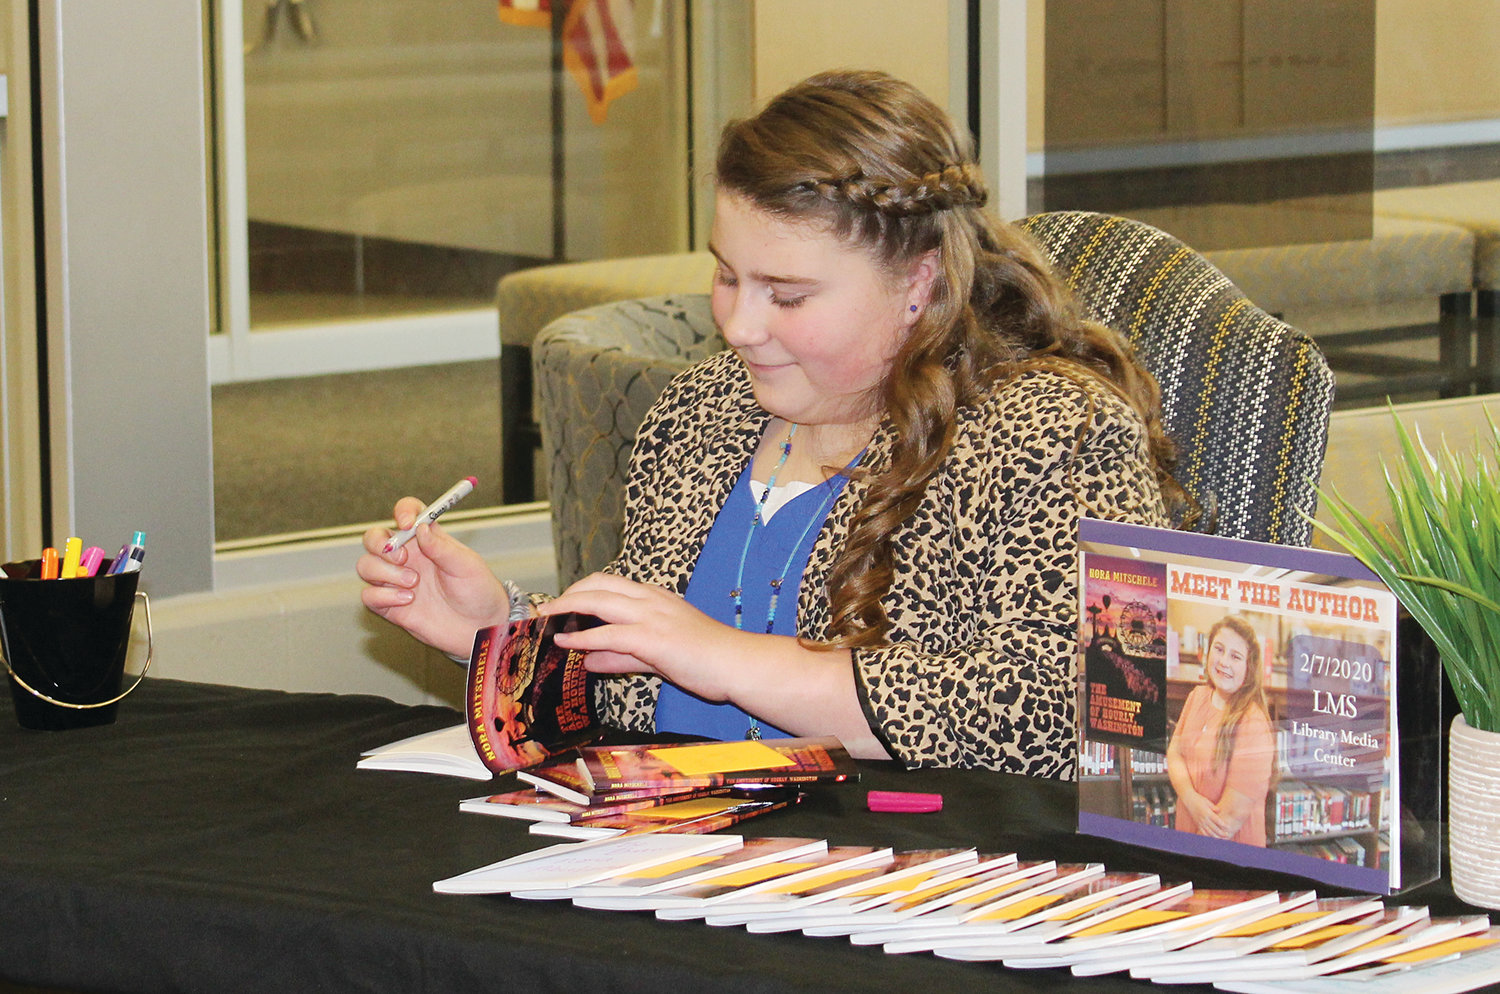 Lebanon Middle School student Nora Mitschele signs copies of her book at a school event Friday.